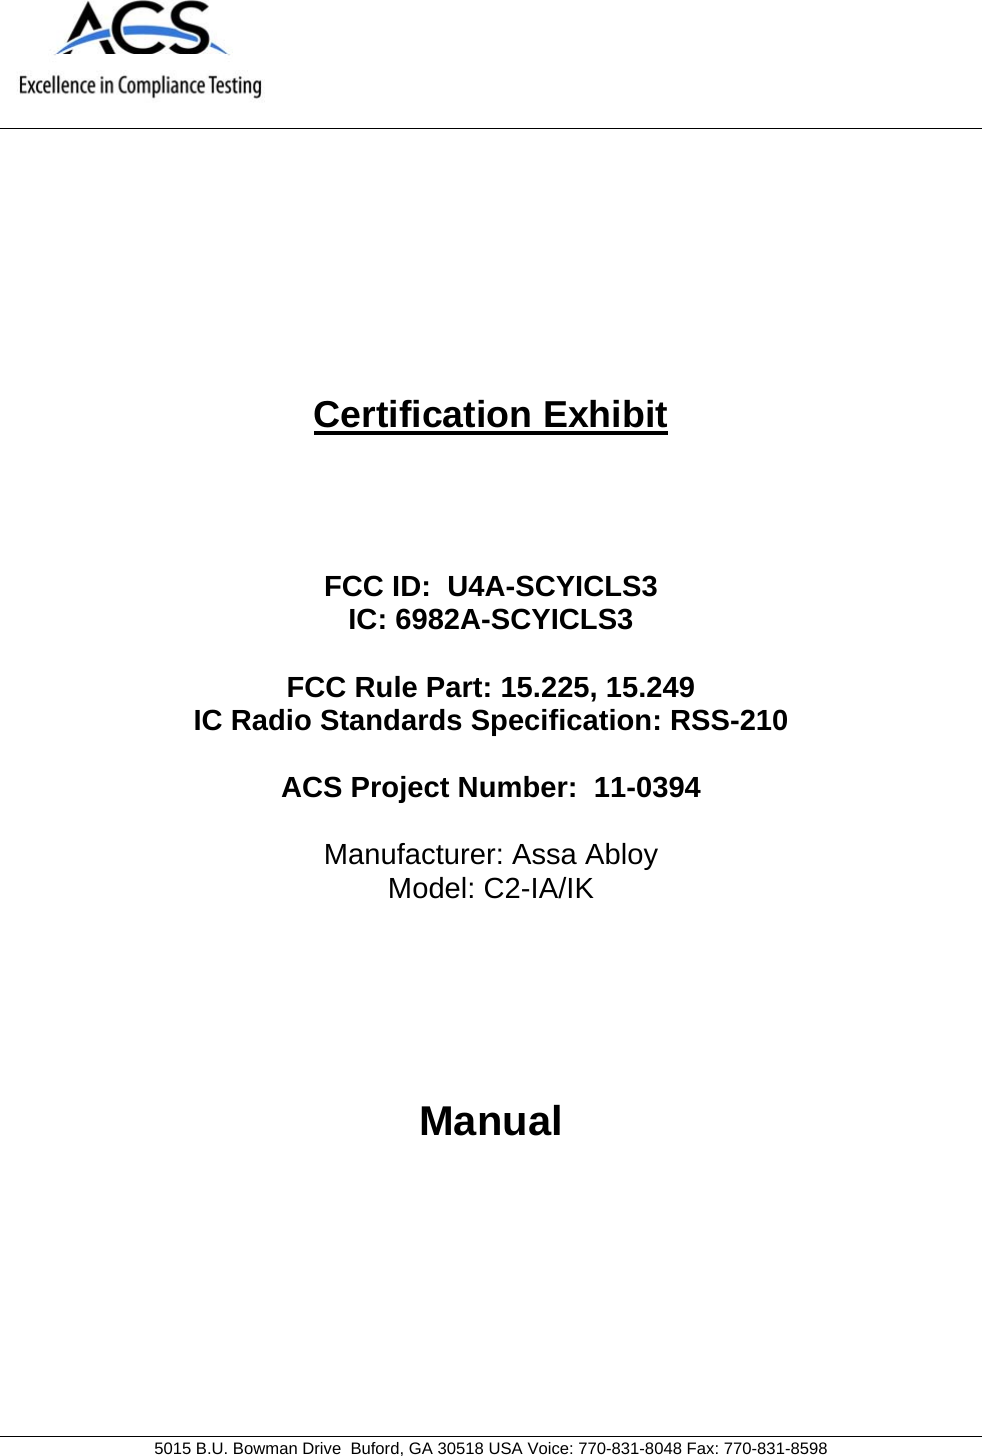     5015 B.U. Bowman Drive  Buford, GA 30518 USA Voice: 770-831-8048 Fax: 770-831-8598   Certification Exhibit     FCC ID:  U4A-SCYICLS3 IC: 6982A-SCYICLS3  FCC Rule Part: 15.225, 15.249 IC Radio Standards Specification: RSS-210  ACS Project Number:  11-0394   Manufacturer: Assa Abloy Model: C2-IA/IK     Manual  